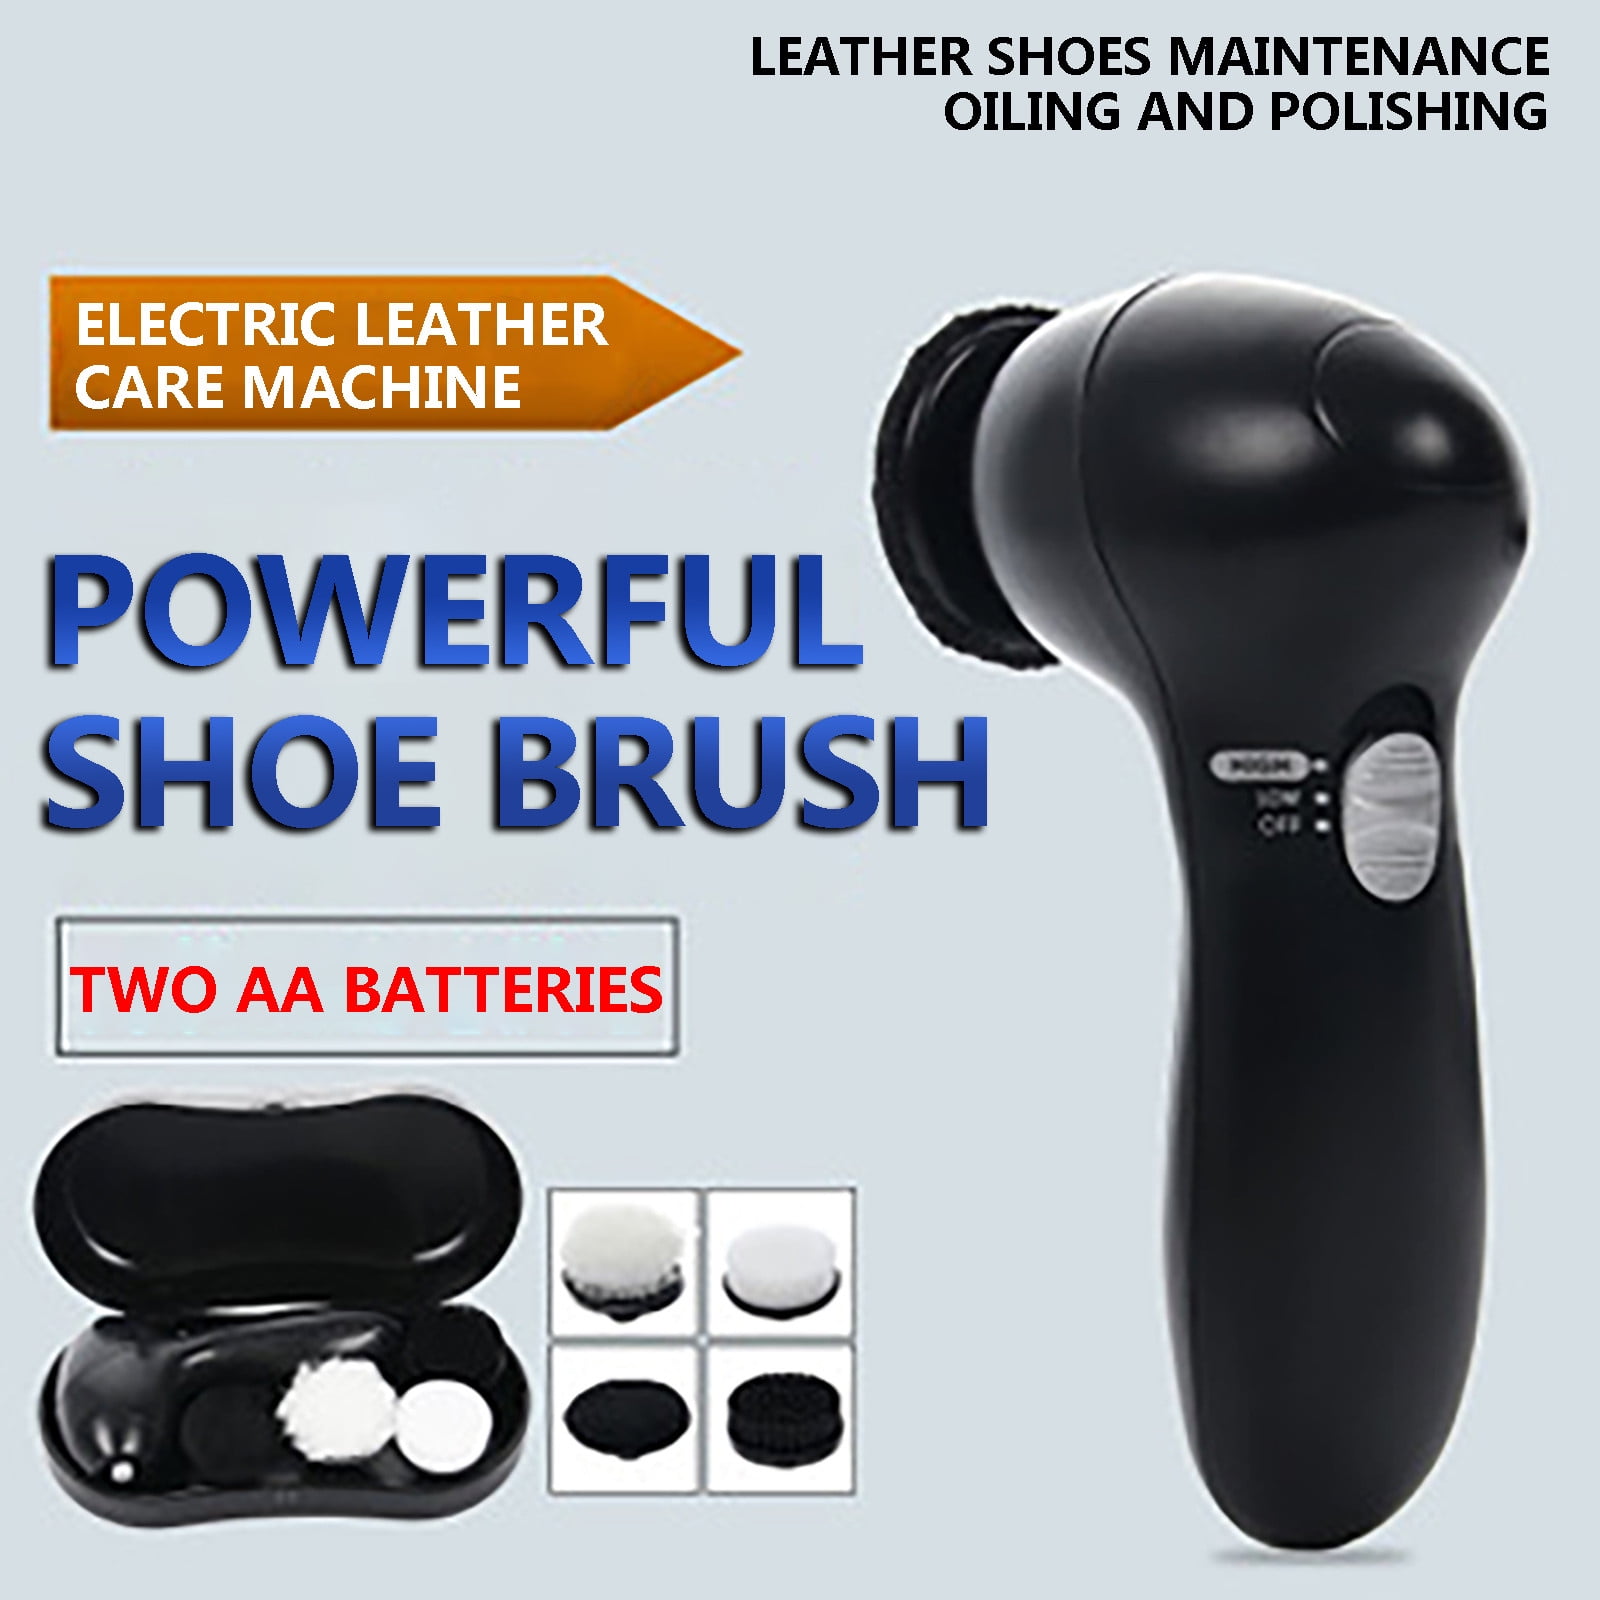 Multifunction Electric Shoe Polisher Electric Shoe Brush Portable Handheld Shoes Cleaning Brush Kit with Storage Box Good Gifts for Office Worker and Friend 